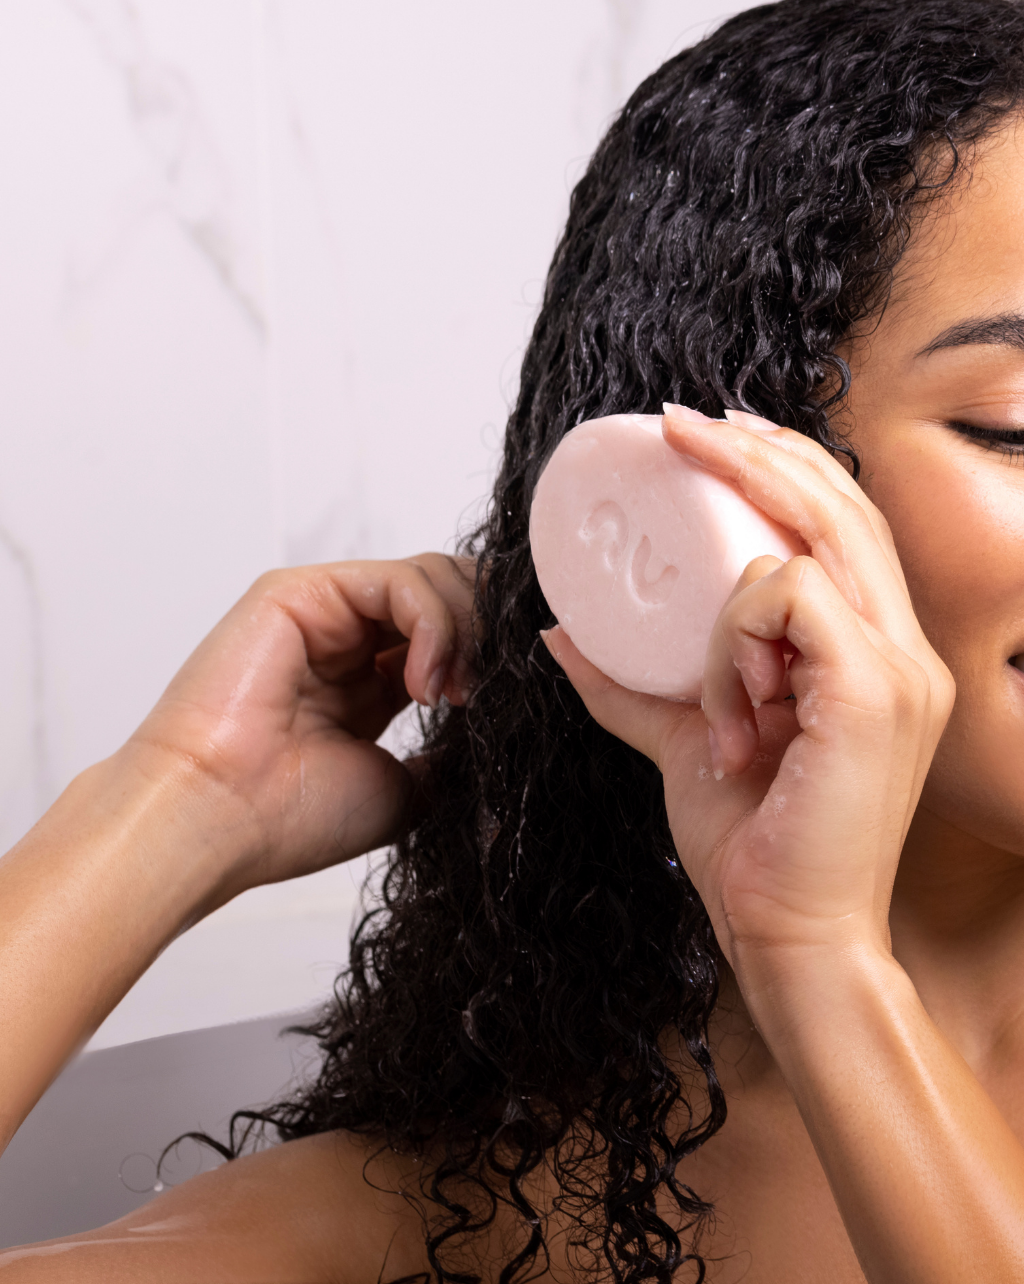 Femme in shower holding the WASH N GO™ Butter Bar Shampoo in her hand. She is holding the product to her hair to show how to apply the bar to wet hair by gliding it along the hair shaft.